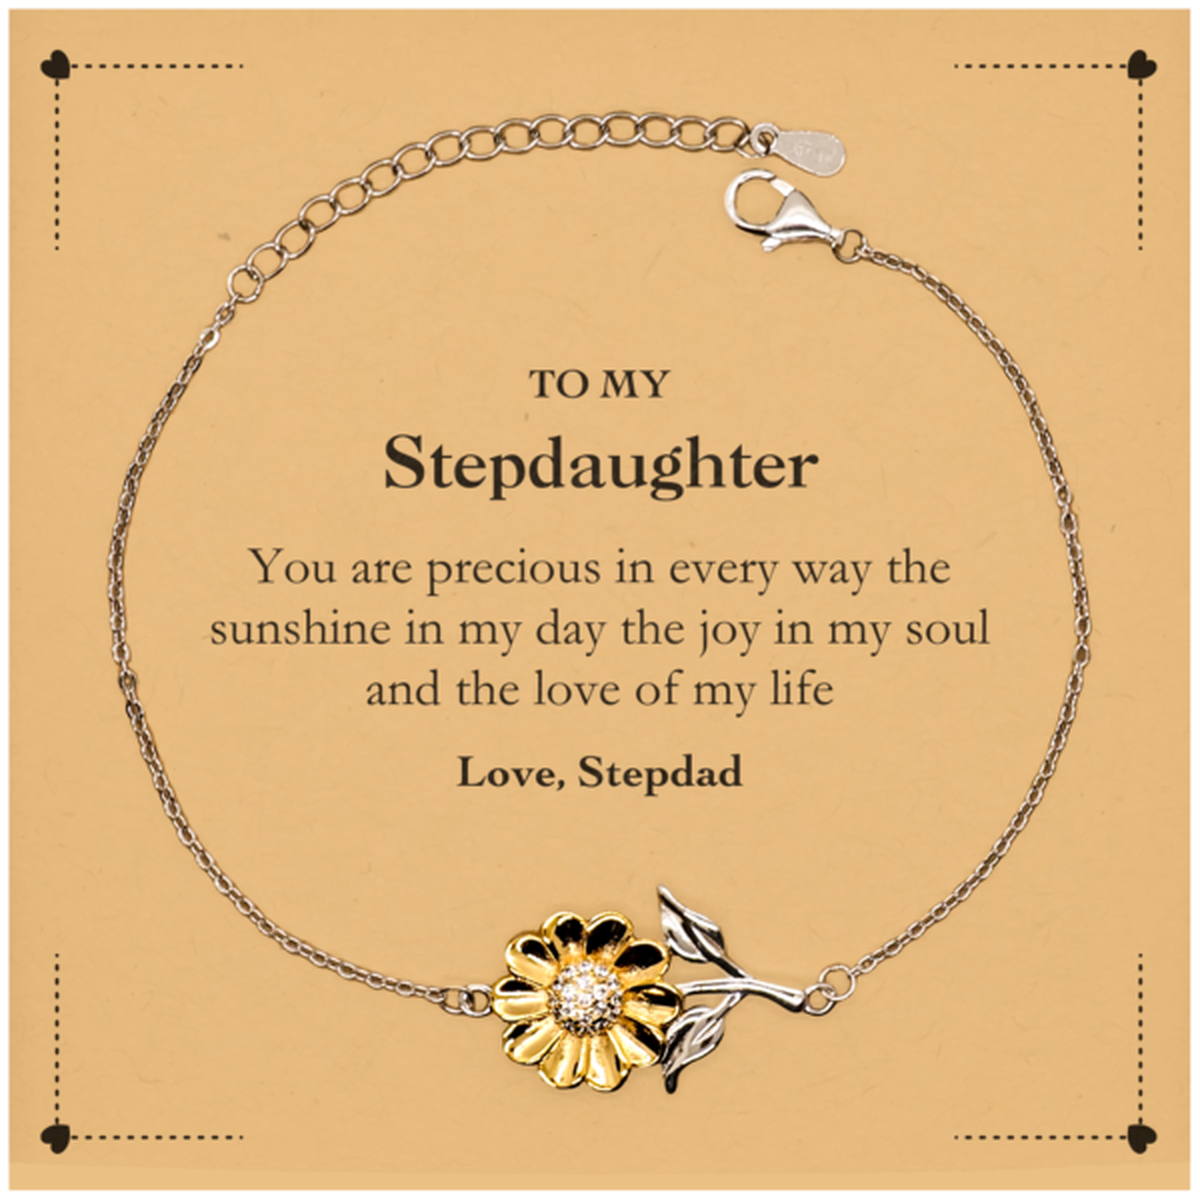 Graduation Gifts for Stepdaughter Sunflower Bracelet Present from Stepdad, Christmas Stepdaughter Birthday Gifts Stepdaughter You are precious in every way the sunshine in my day. Love, Stepdad